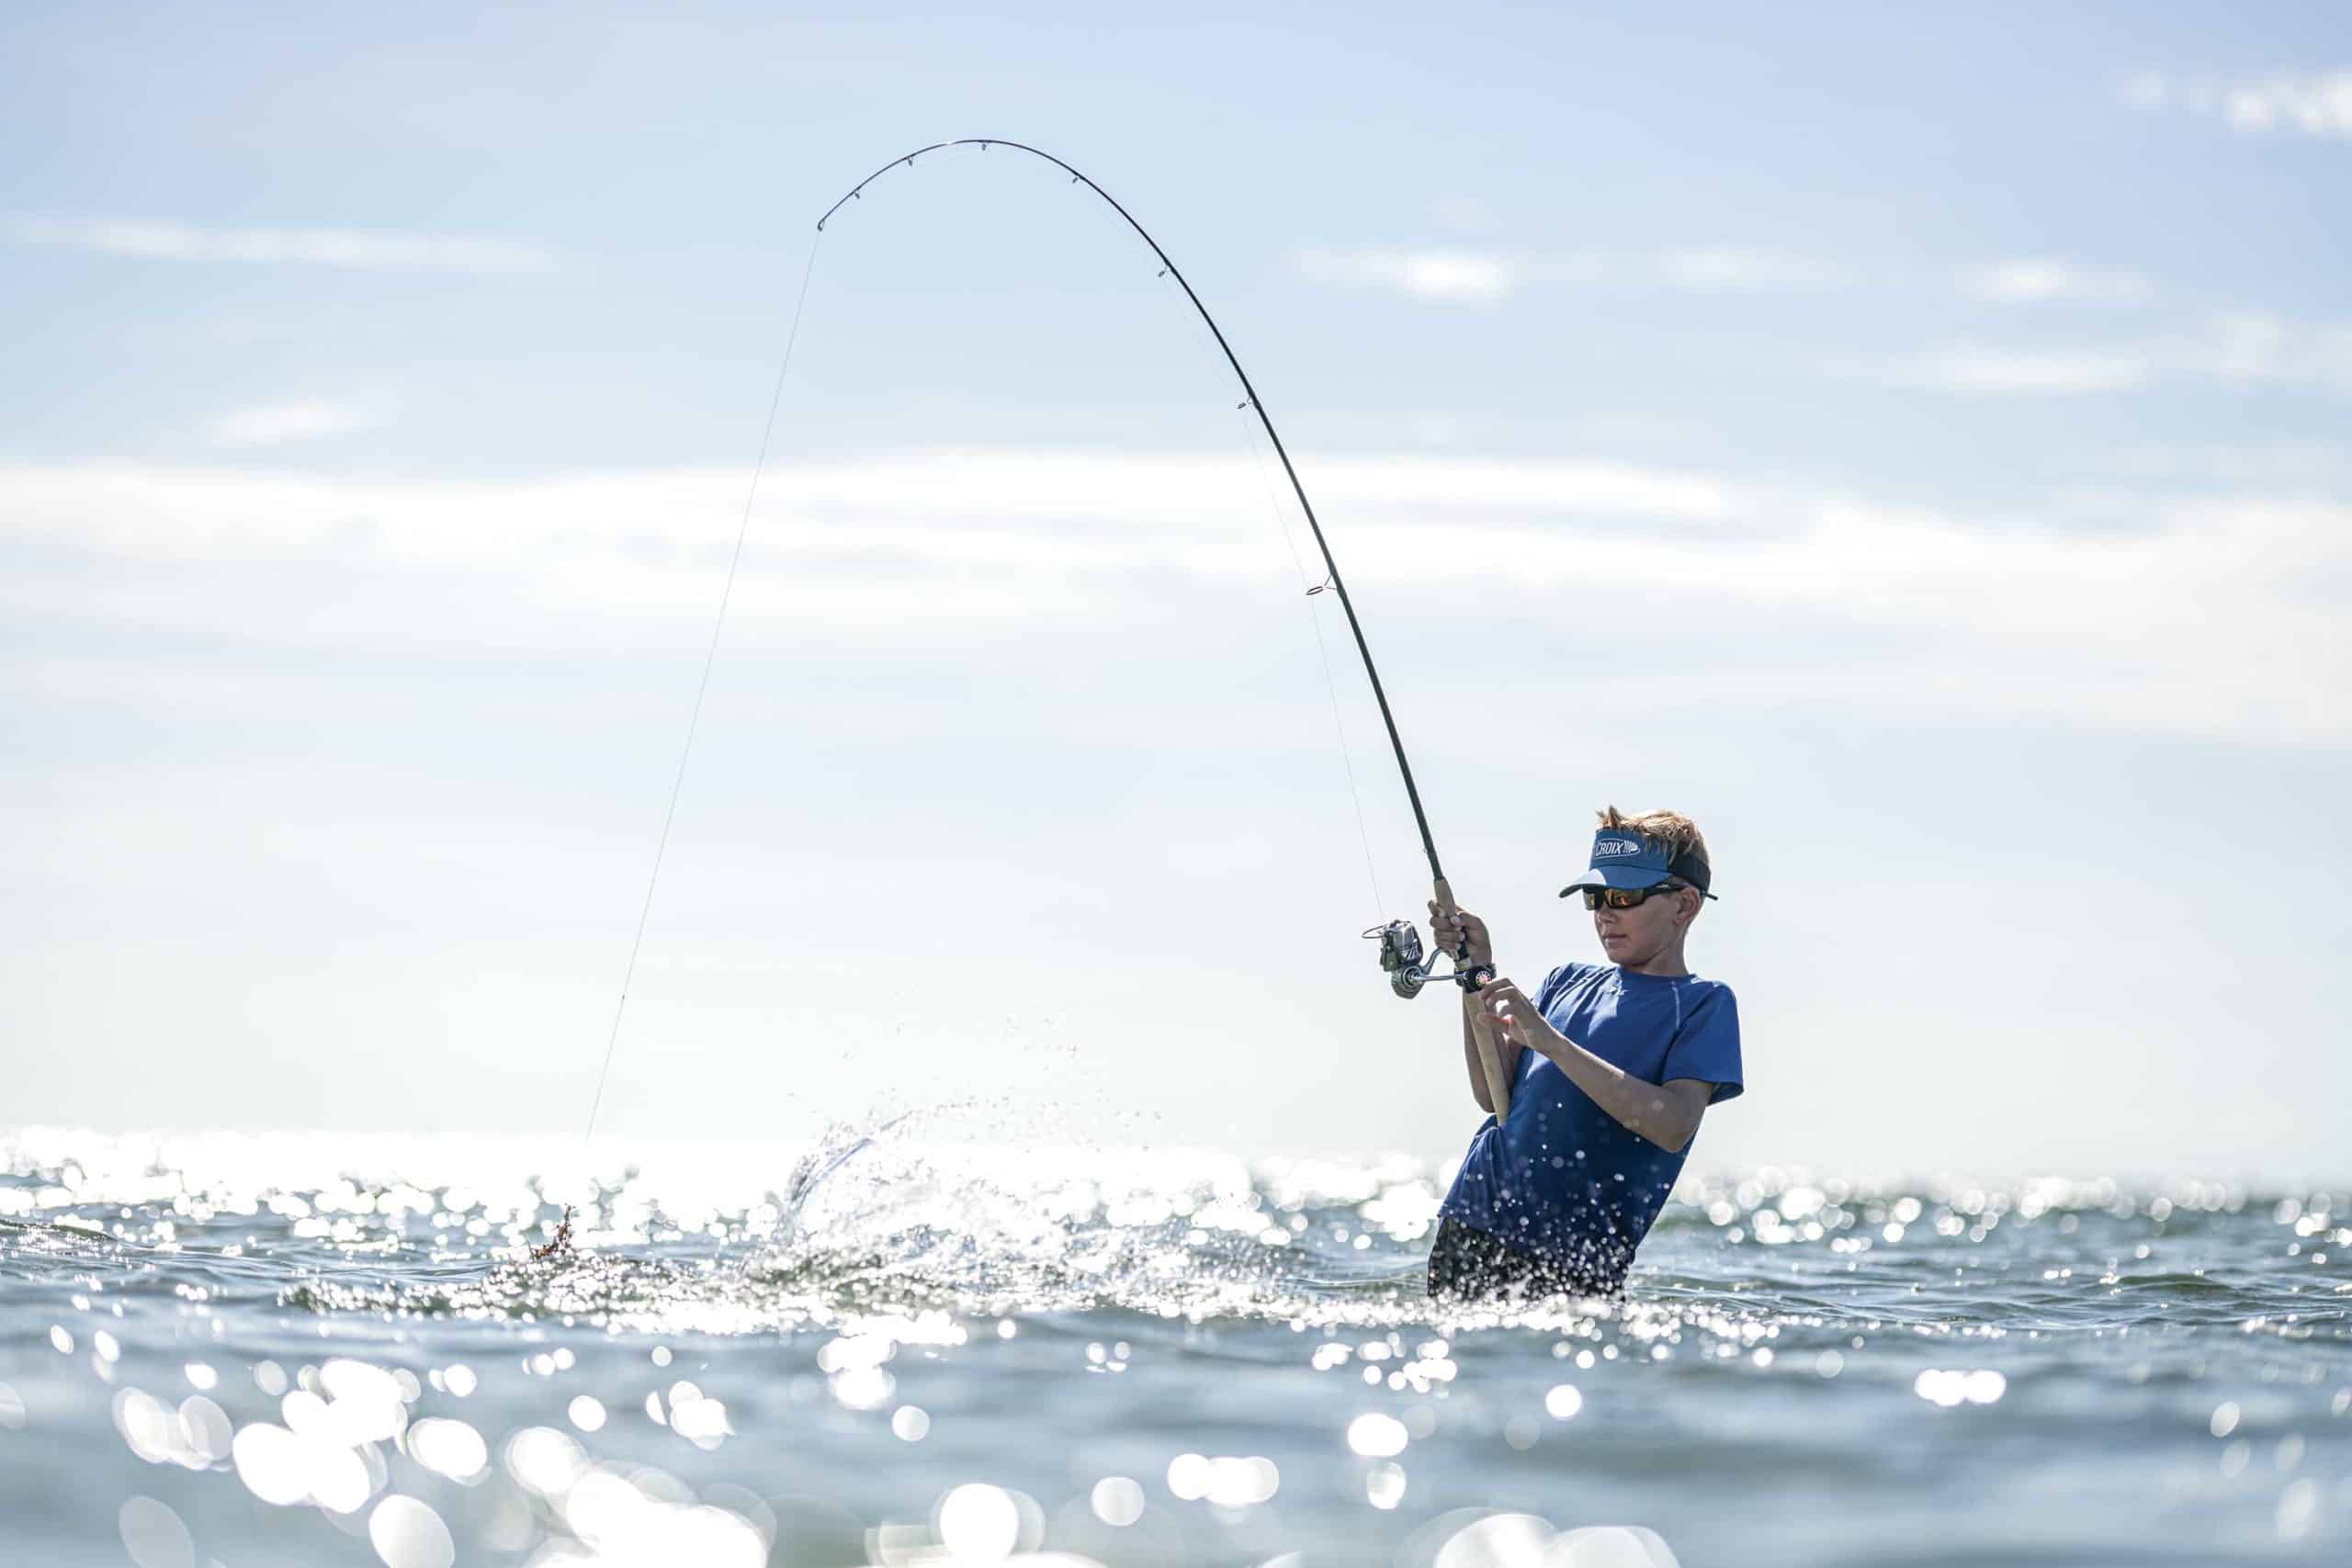 Tips on How to Choose a Fishing Rod: Gear Up Right